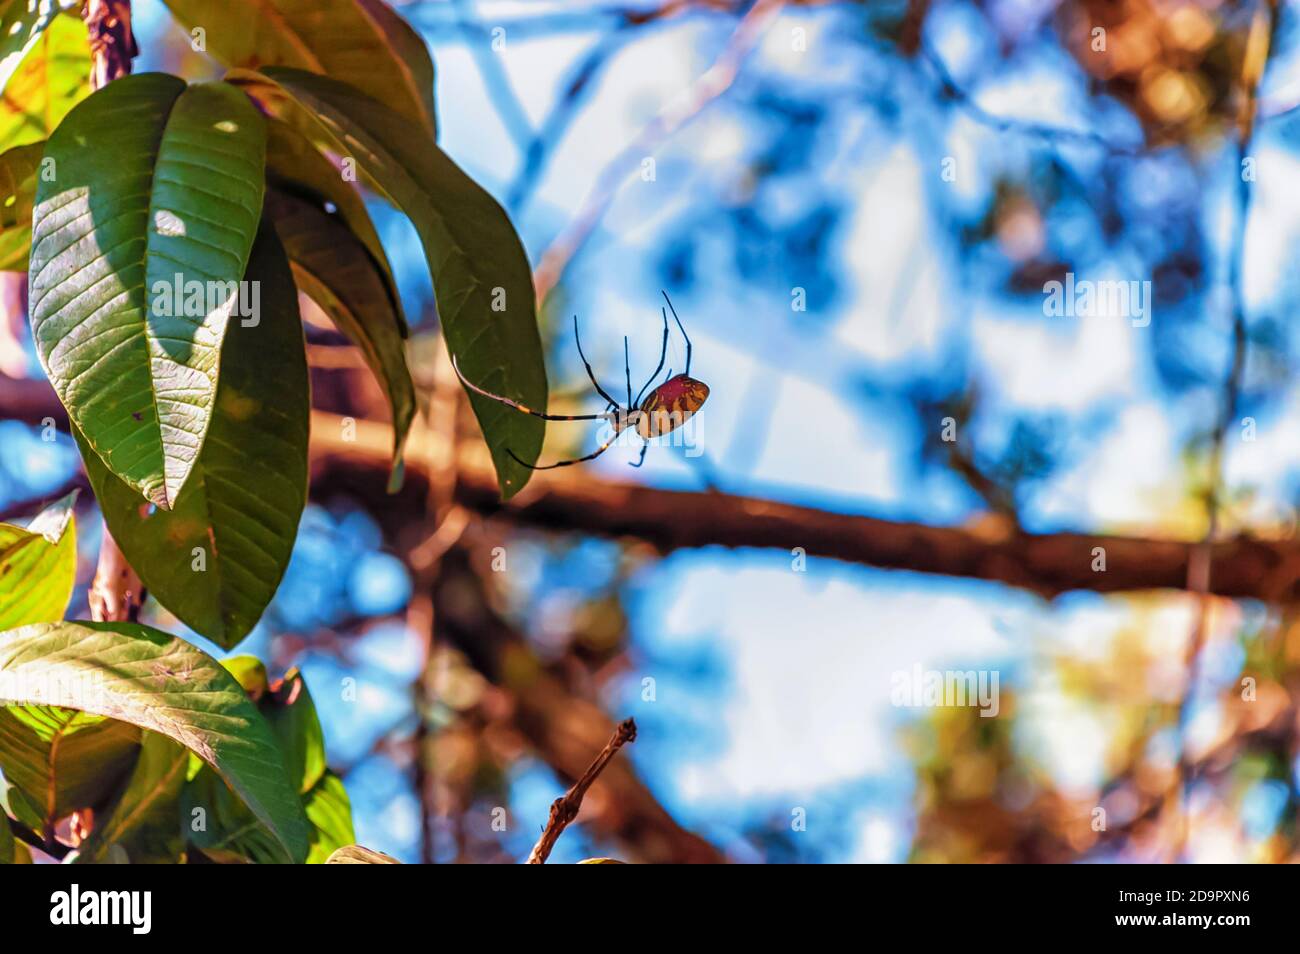 A black and yellow garden spider—Argiope aurantia—using its web to hang and climb down from a branch of a tree. Stock Photo